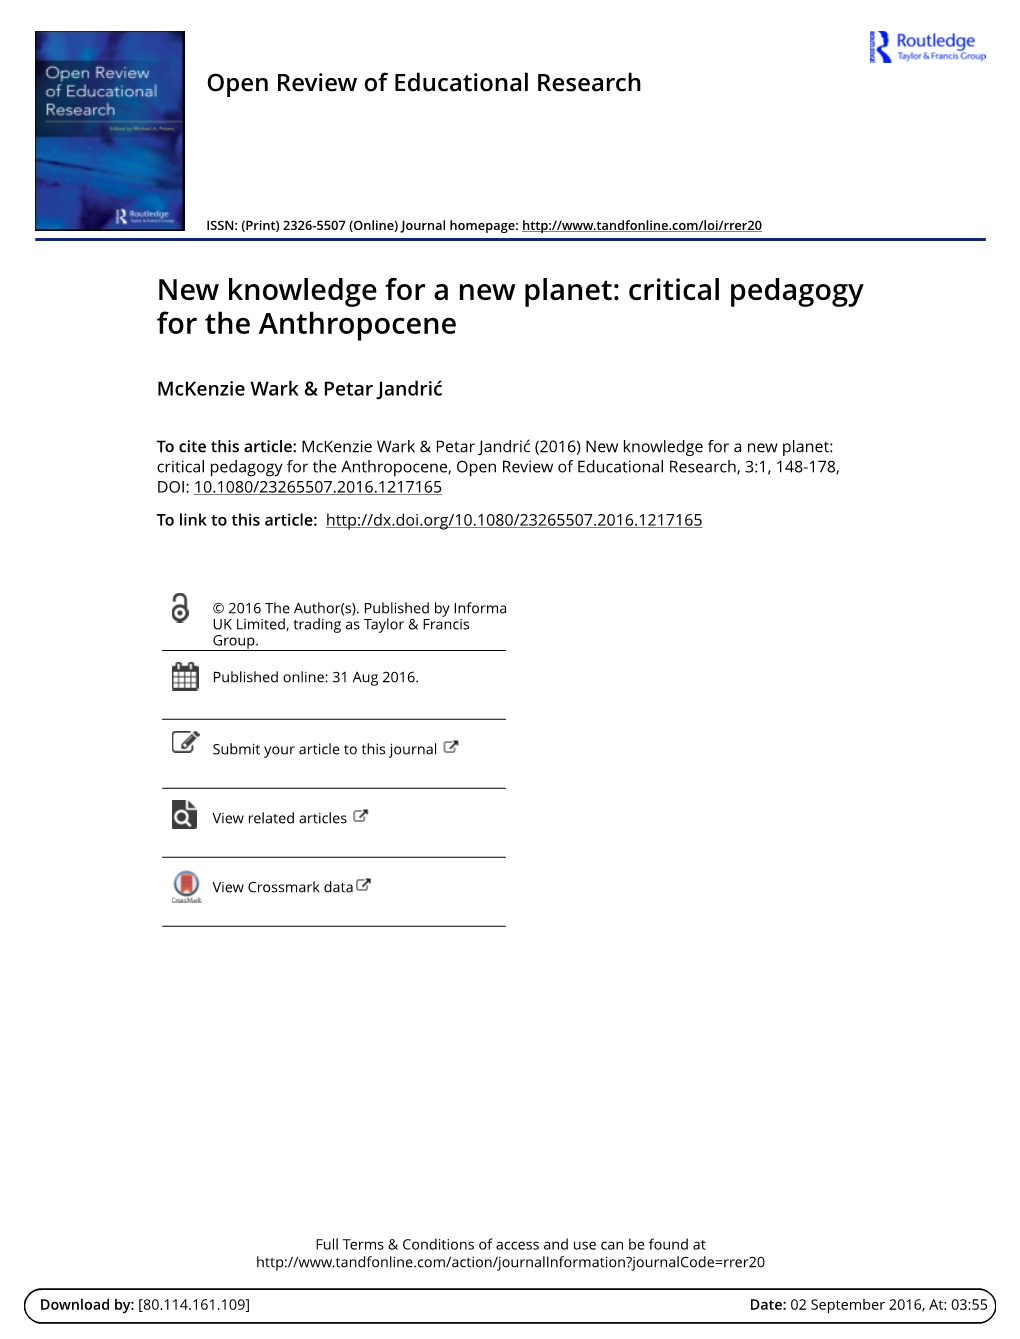 New Knowledge for a New Planet: Critical Pedagogy for the Anthropocene